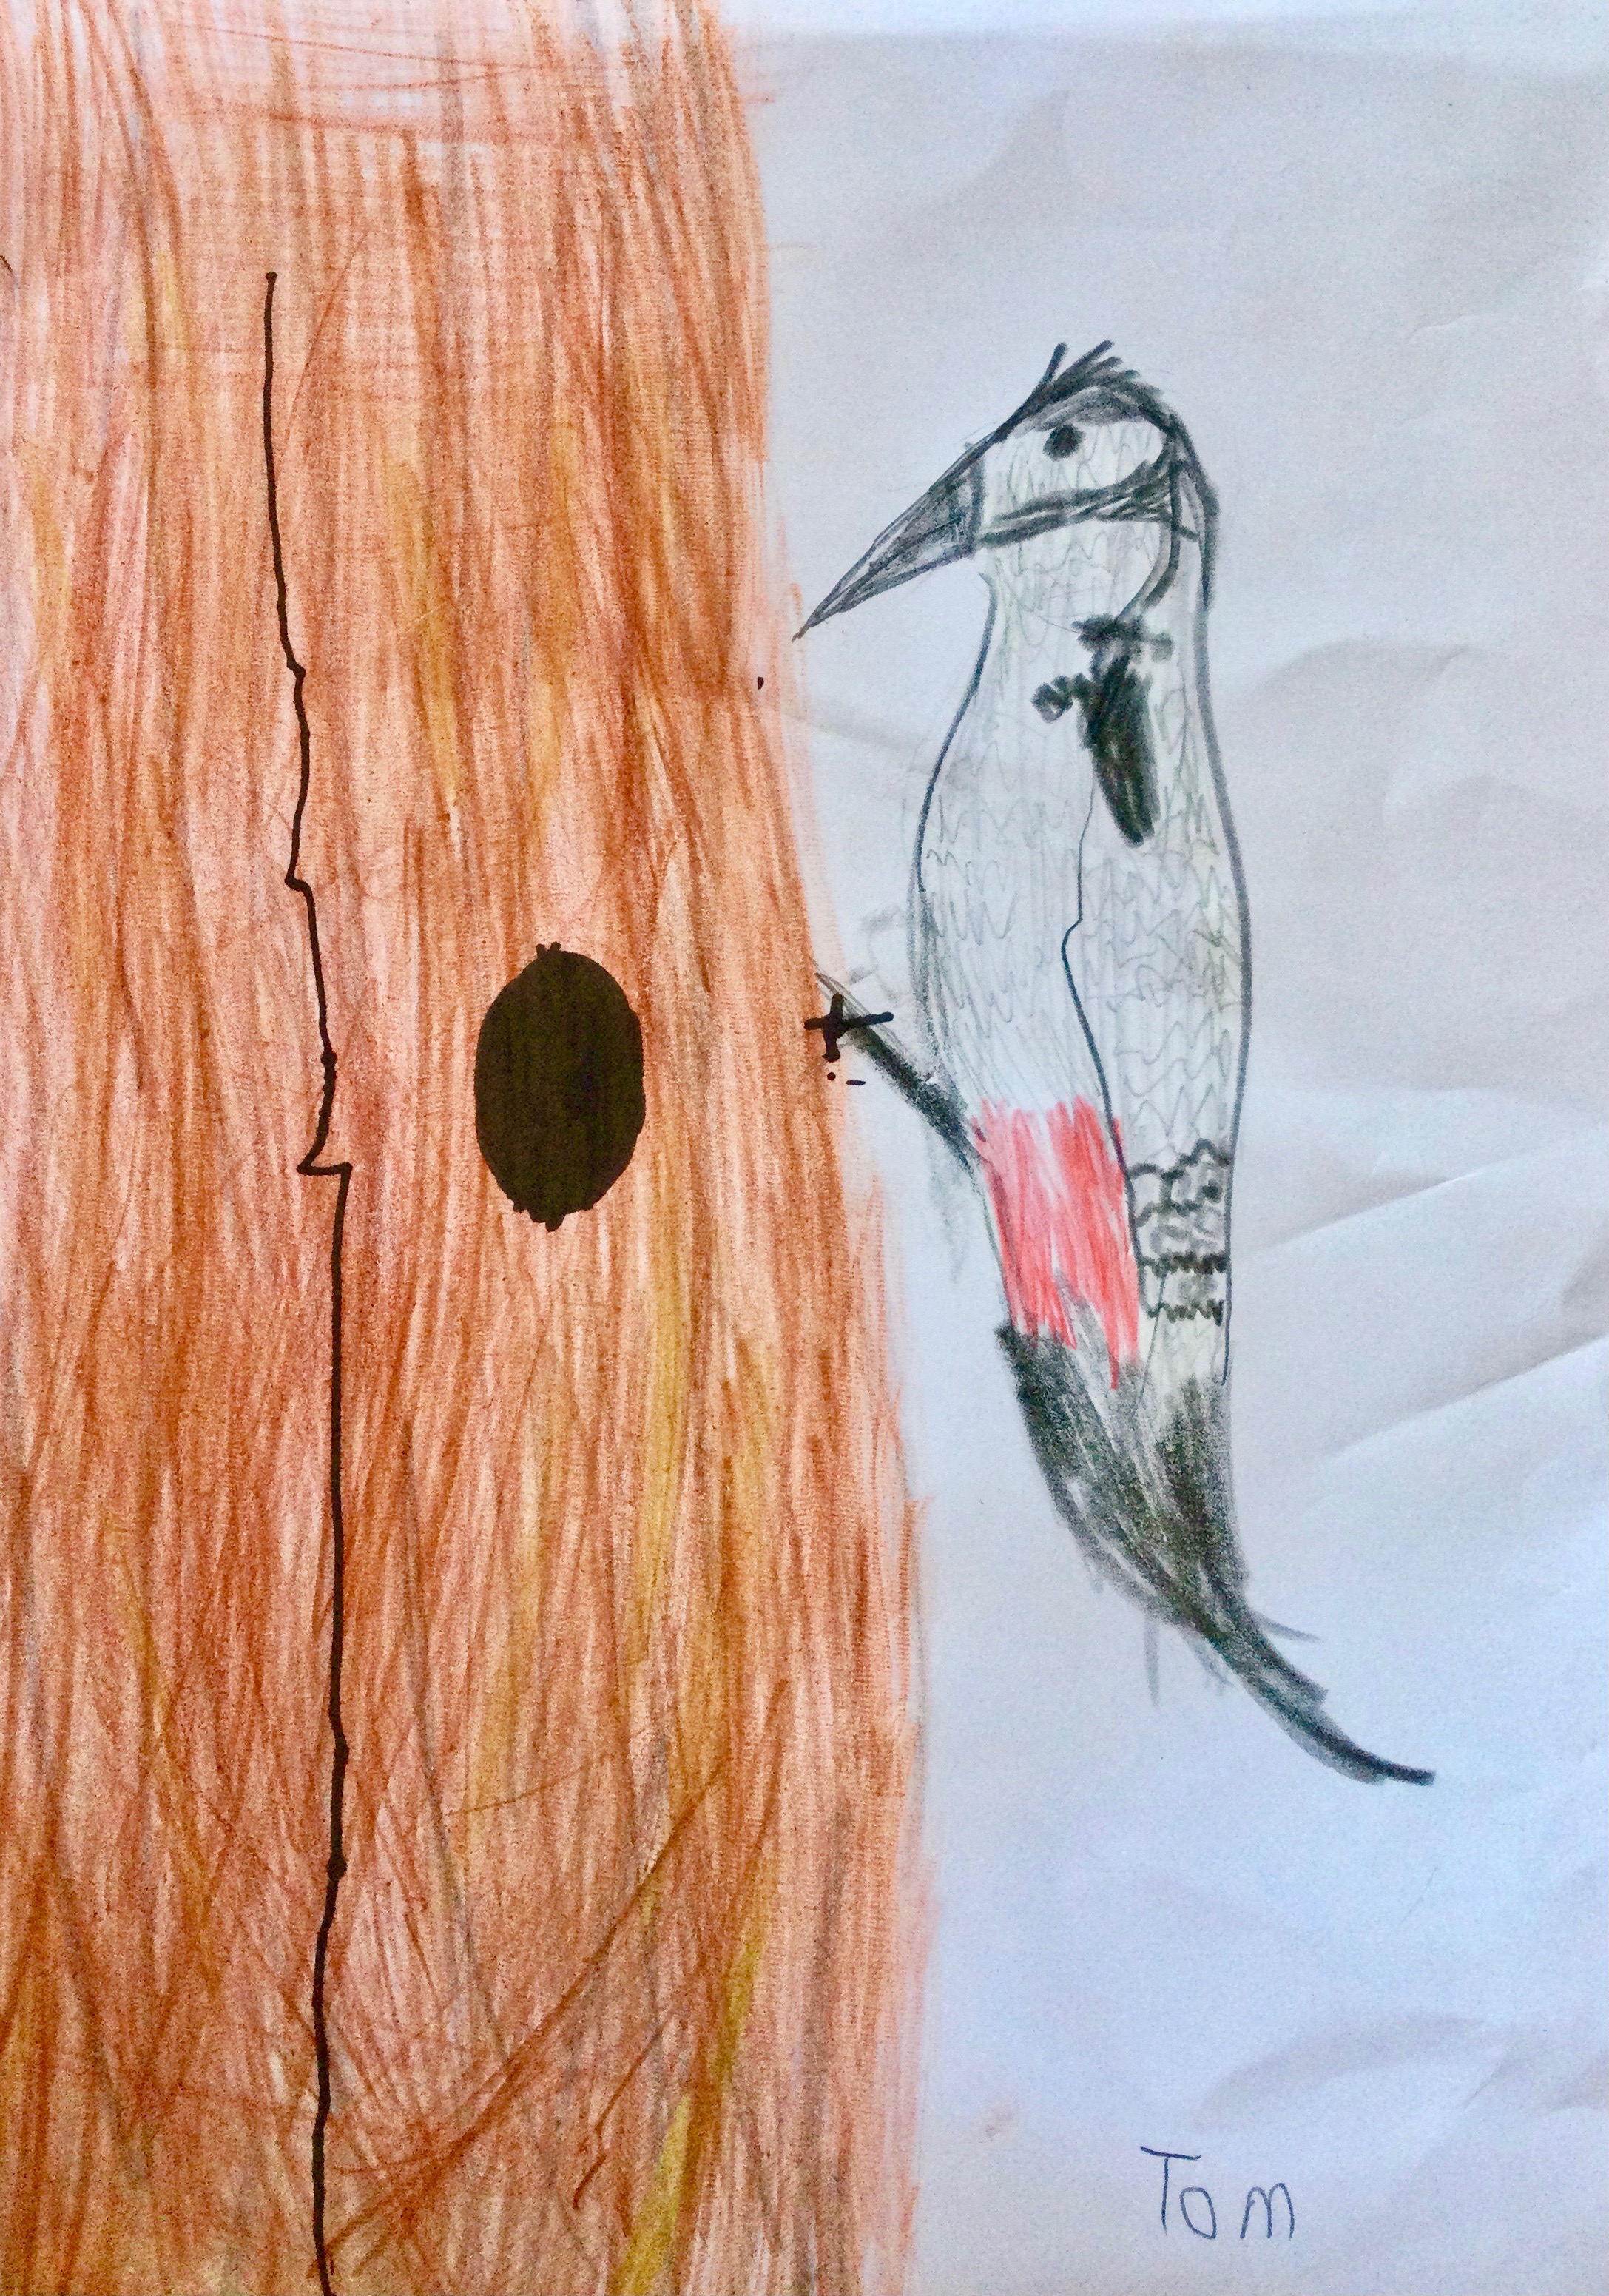 'Woodpecker' by Tom (7) from Offaly